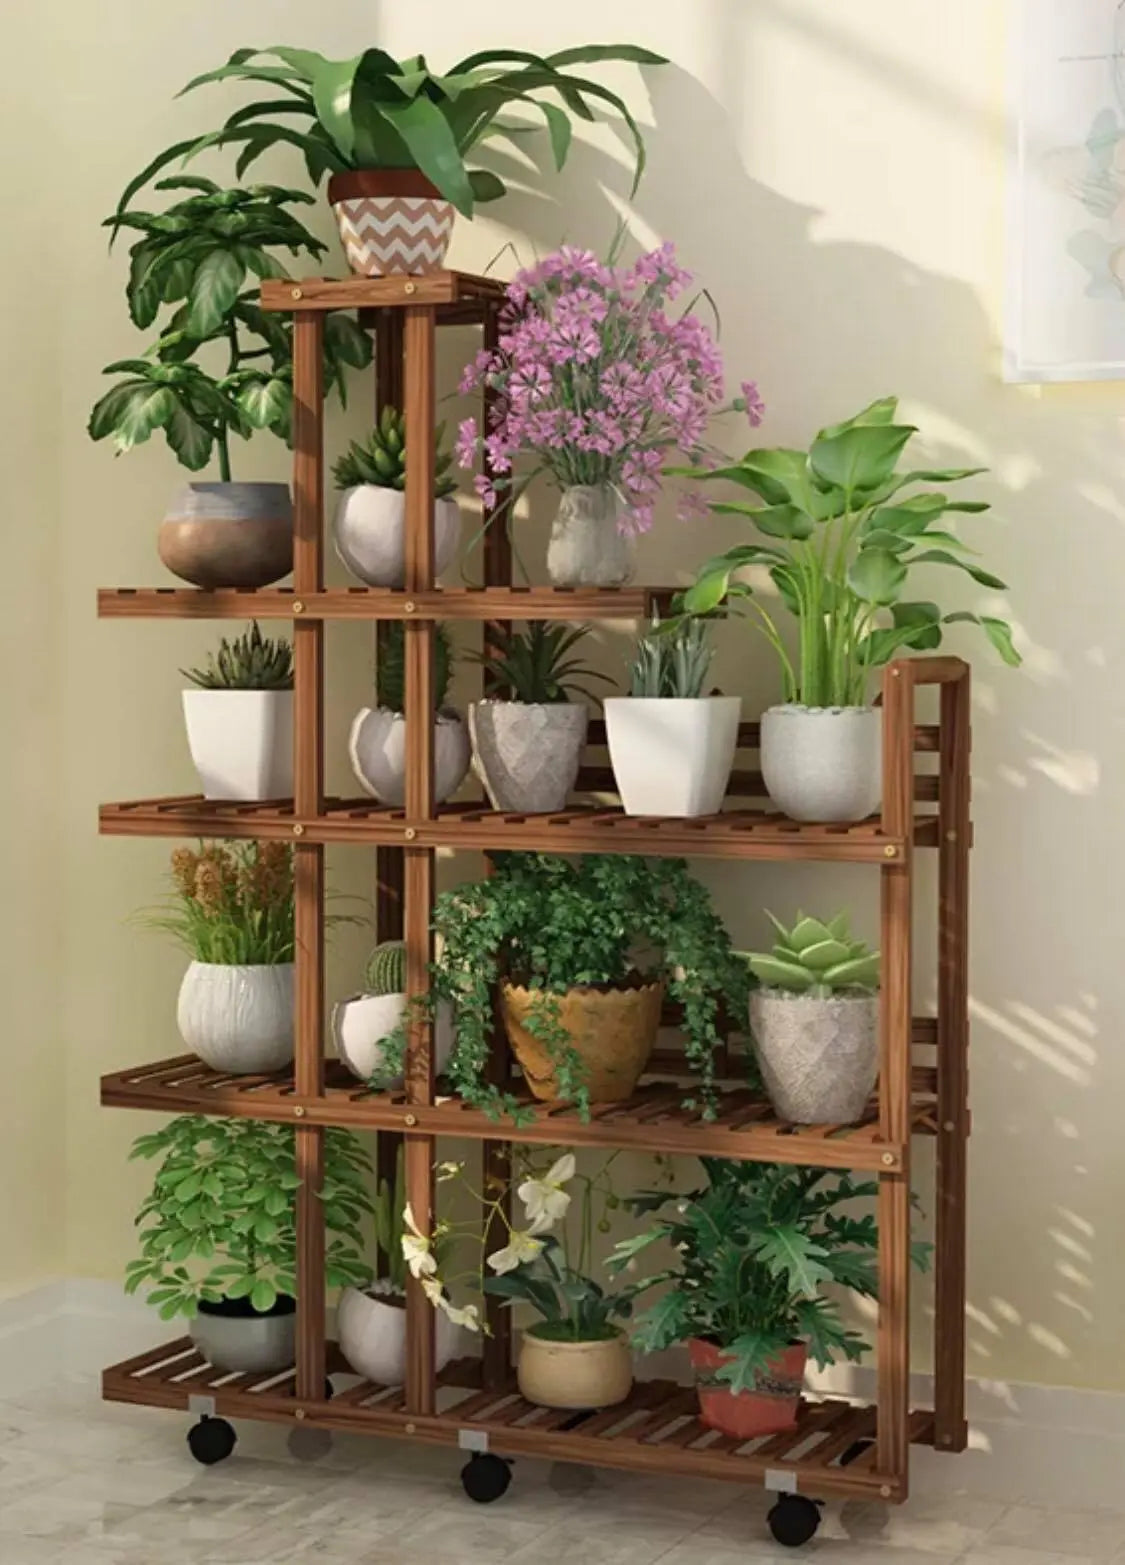 Premium Wooden Plant Stand Indoor Outdoor Garden Planter With Or Without Wheels everythingbamboo